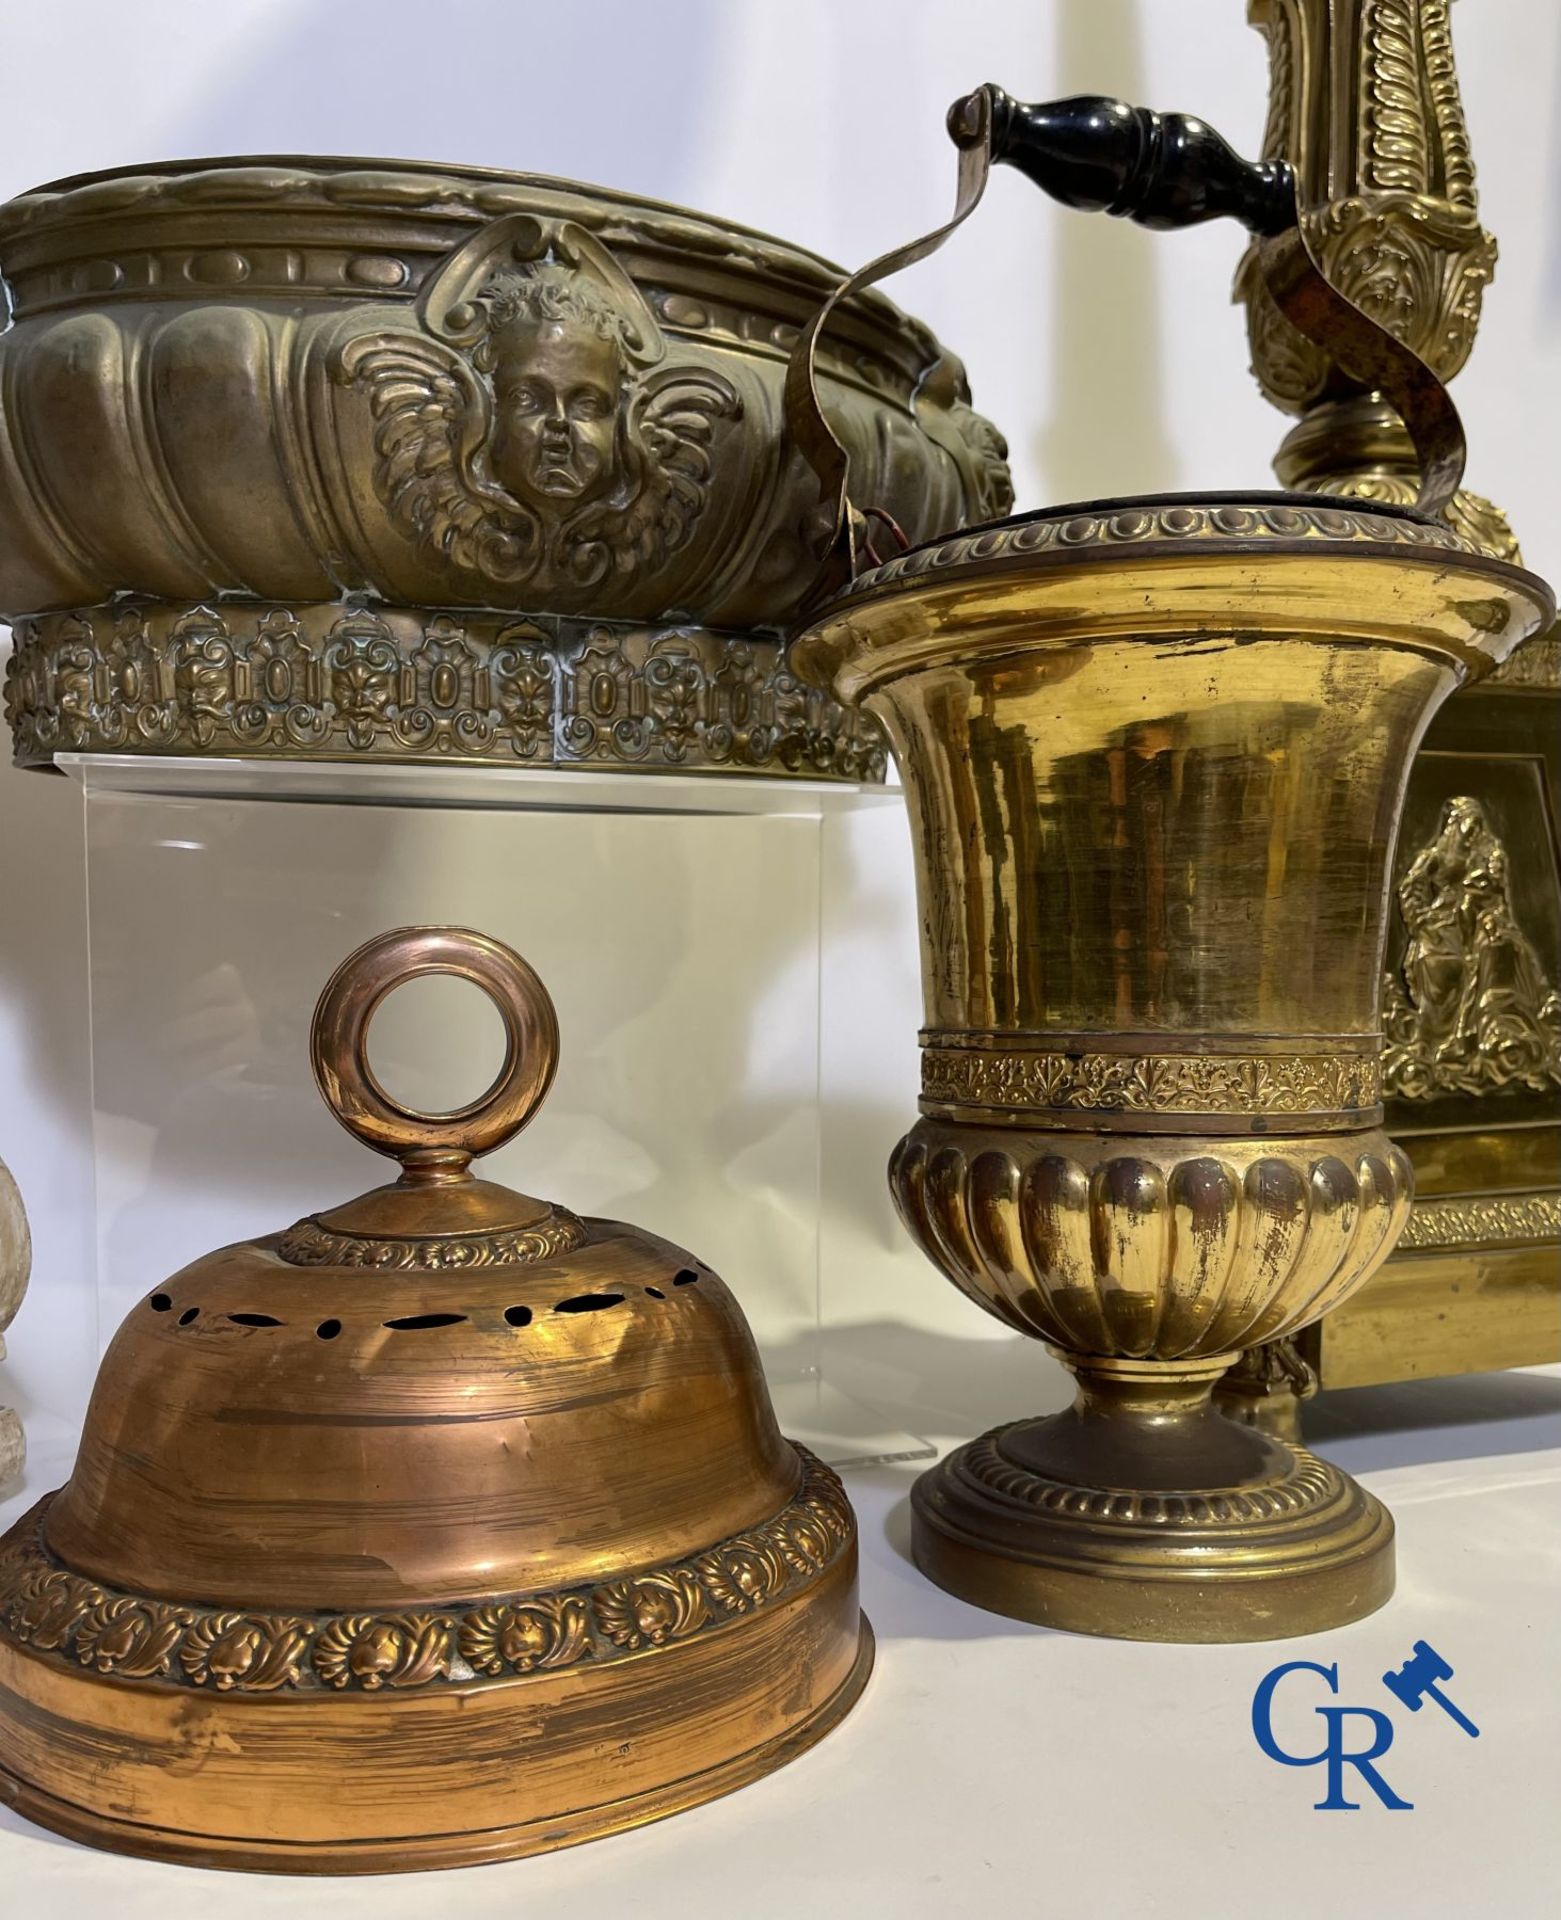 Lot of religious objects in wood and copper. 18th - 19th century. 4 candlesticks, a copper jardinier - Image 7 of 16